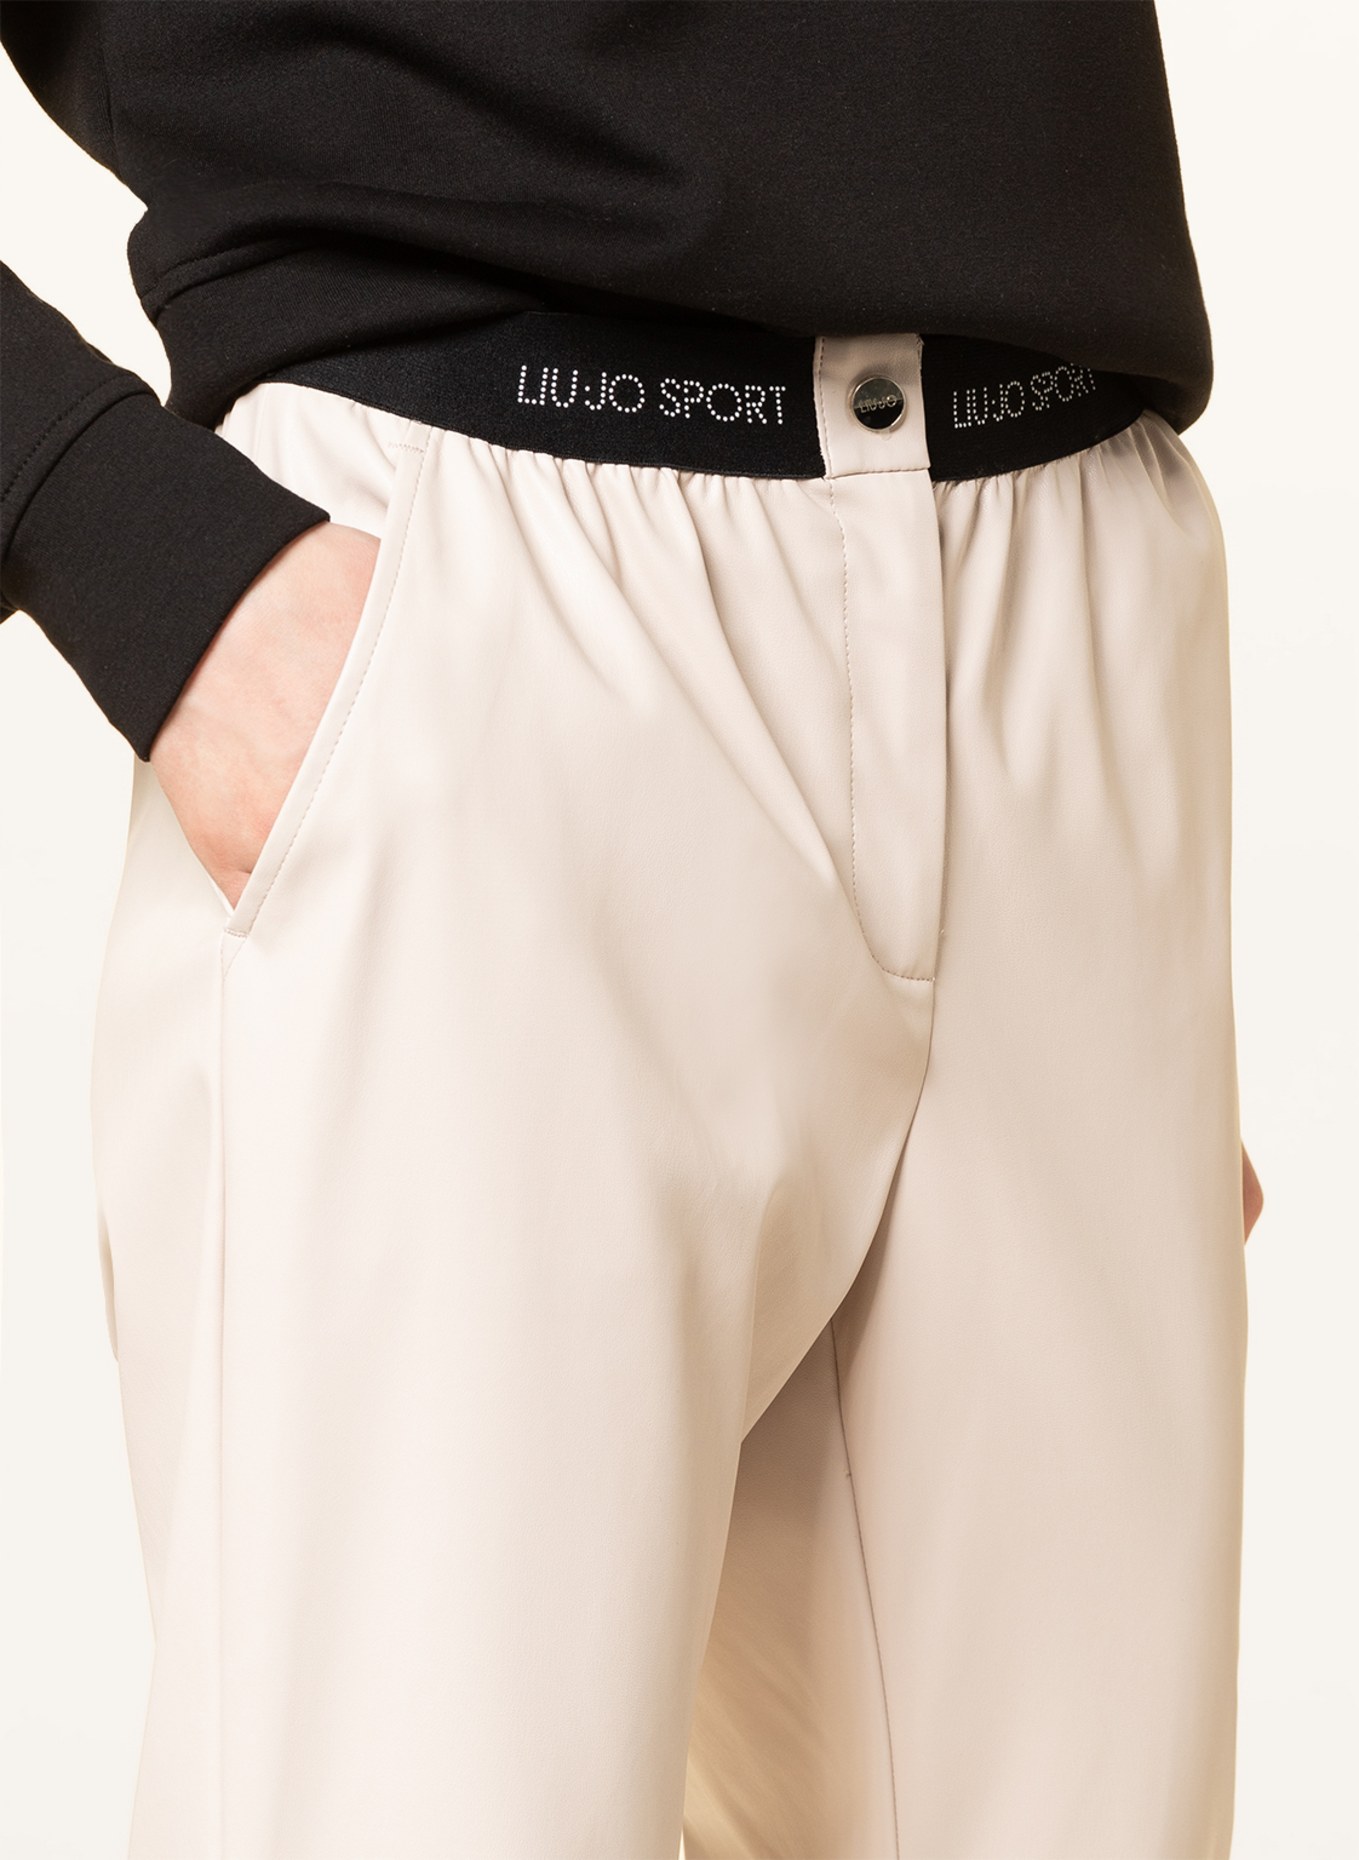 LIU JO Pants in jogger style in leather look, Color: CREAM (Image 5)